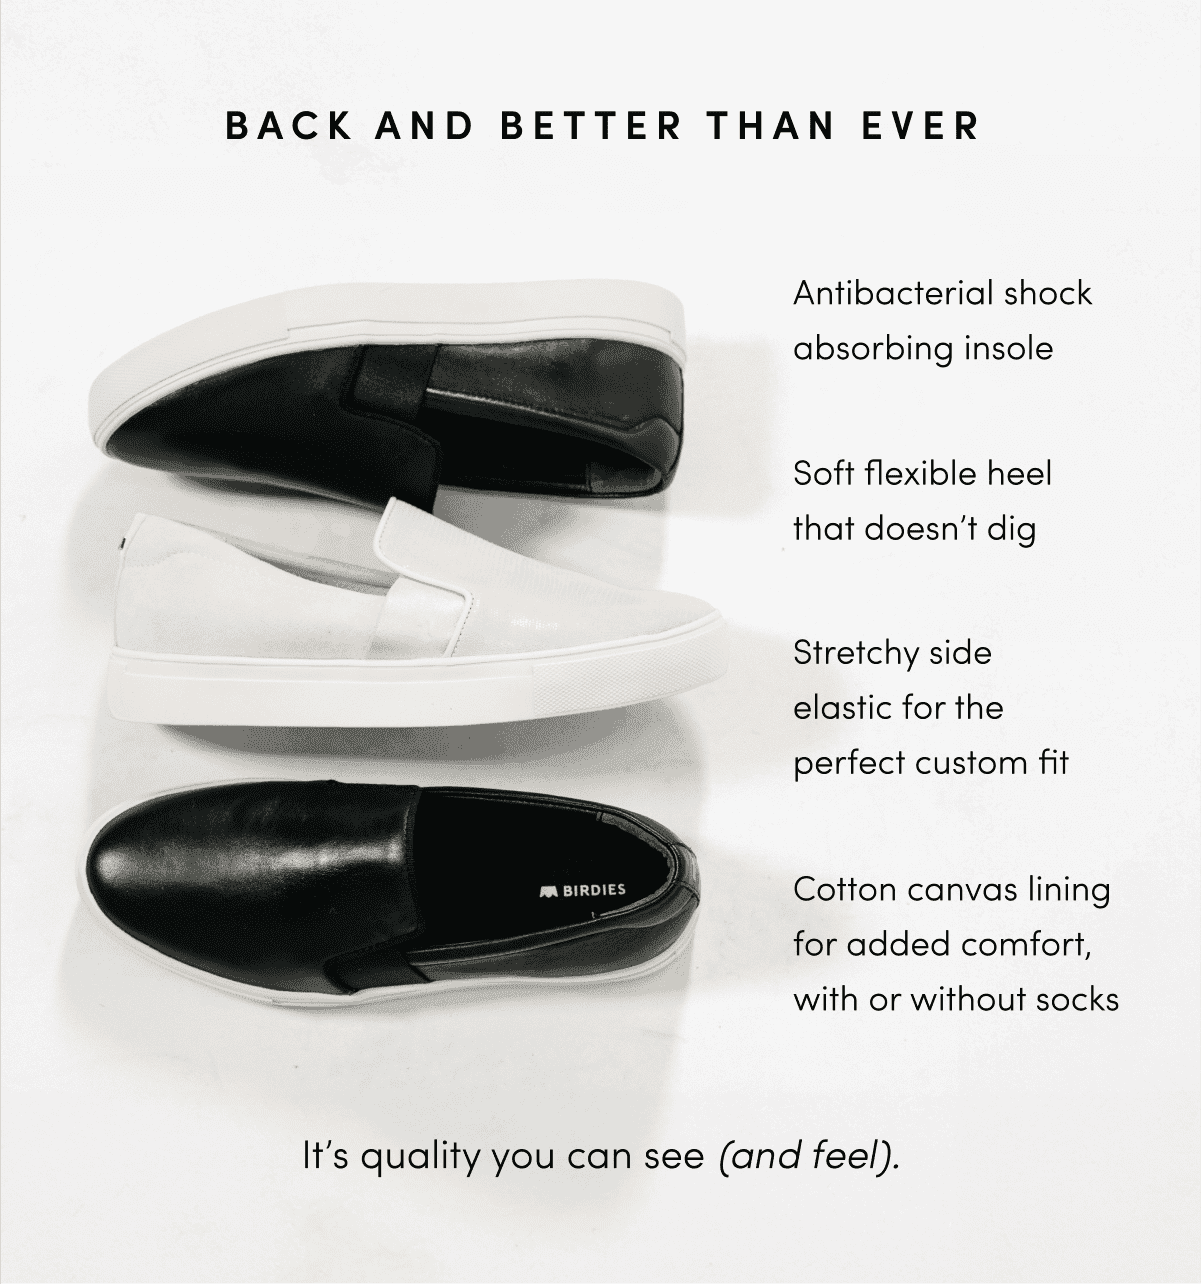 Back and better than ever - Antibacterial shock-absorbing insole crafted by PerfX; Soft flexible heel that doesn’t dig; Stretchy side elastic for the perfect custom fit; Cotton canvas lining for added comfort, with or without socks. It's quality you can see (and feel).